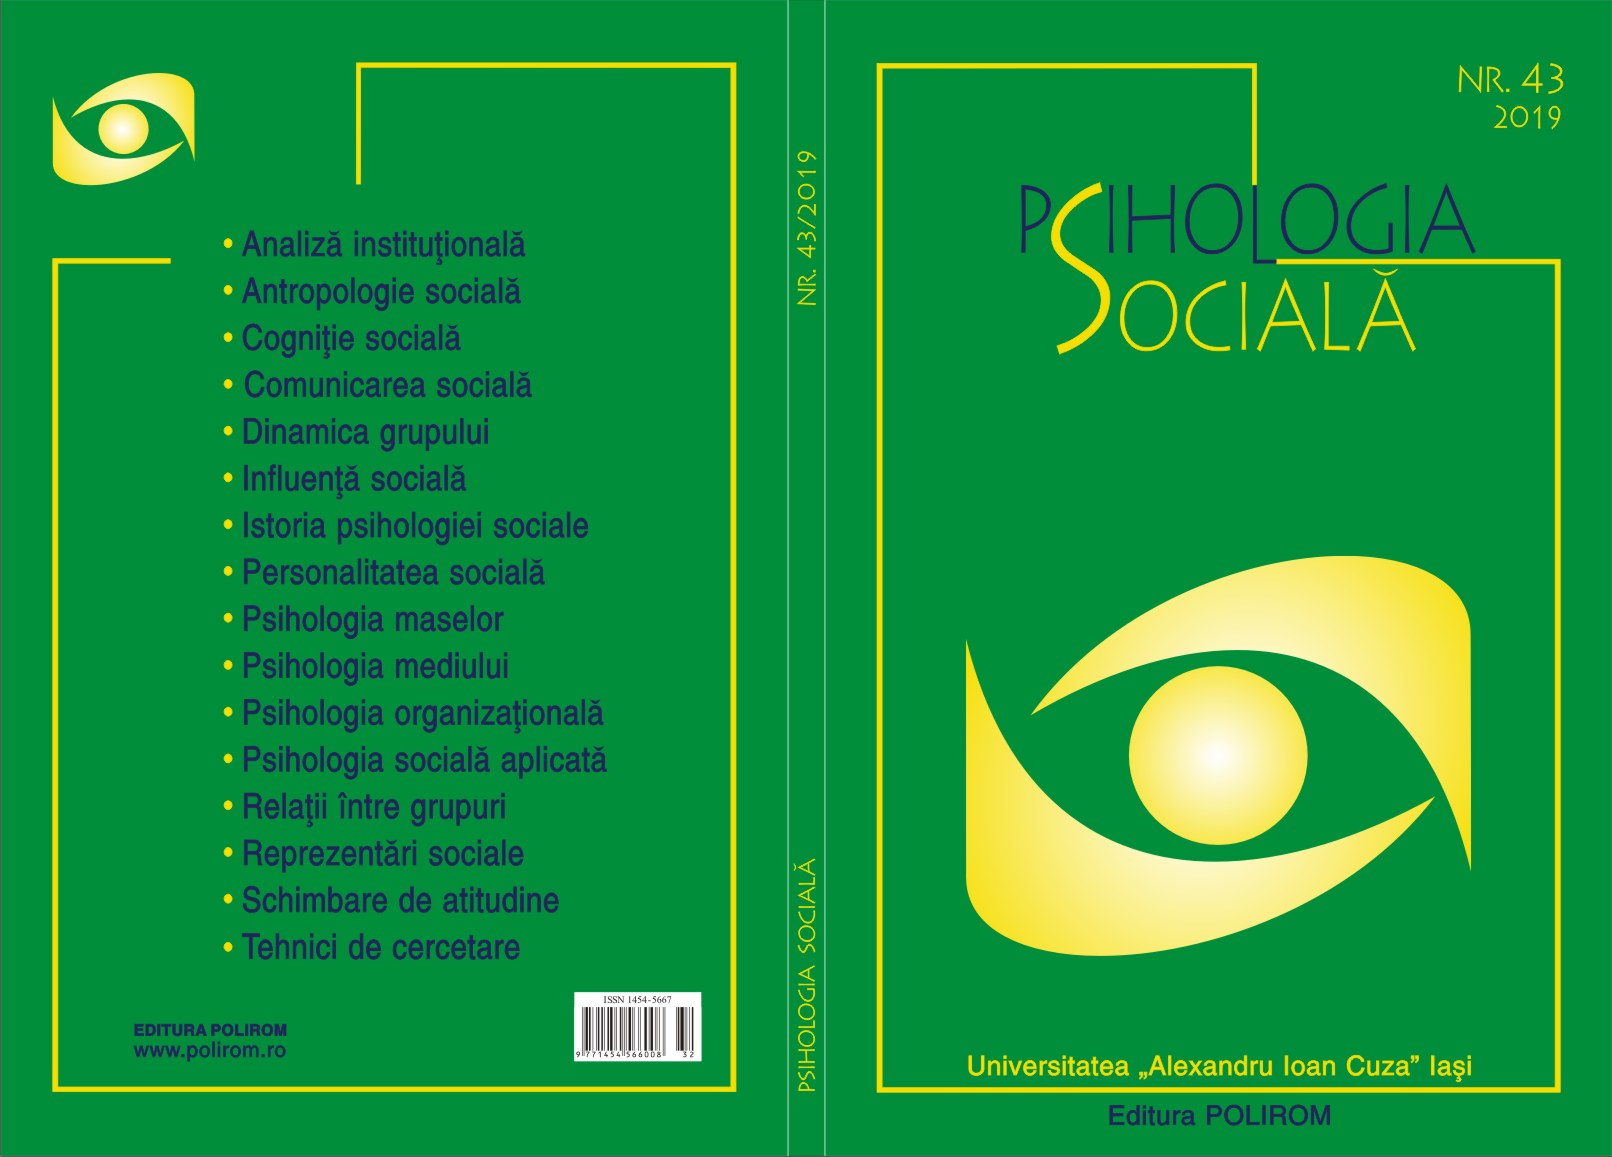 Adela Hîncu, Victor Karady, Social Sciences in the “Other Europe” since 1945, Budapest, Central Europe University, 2018 Cover Image